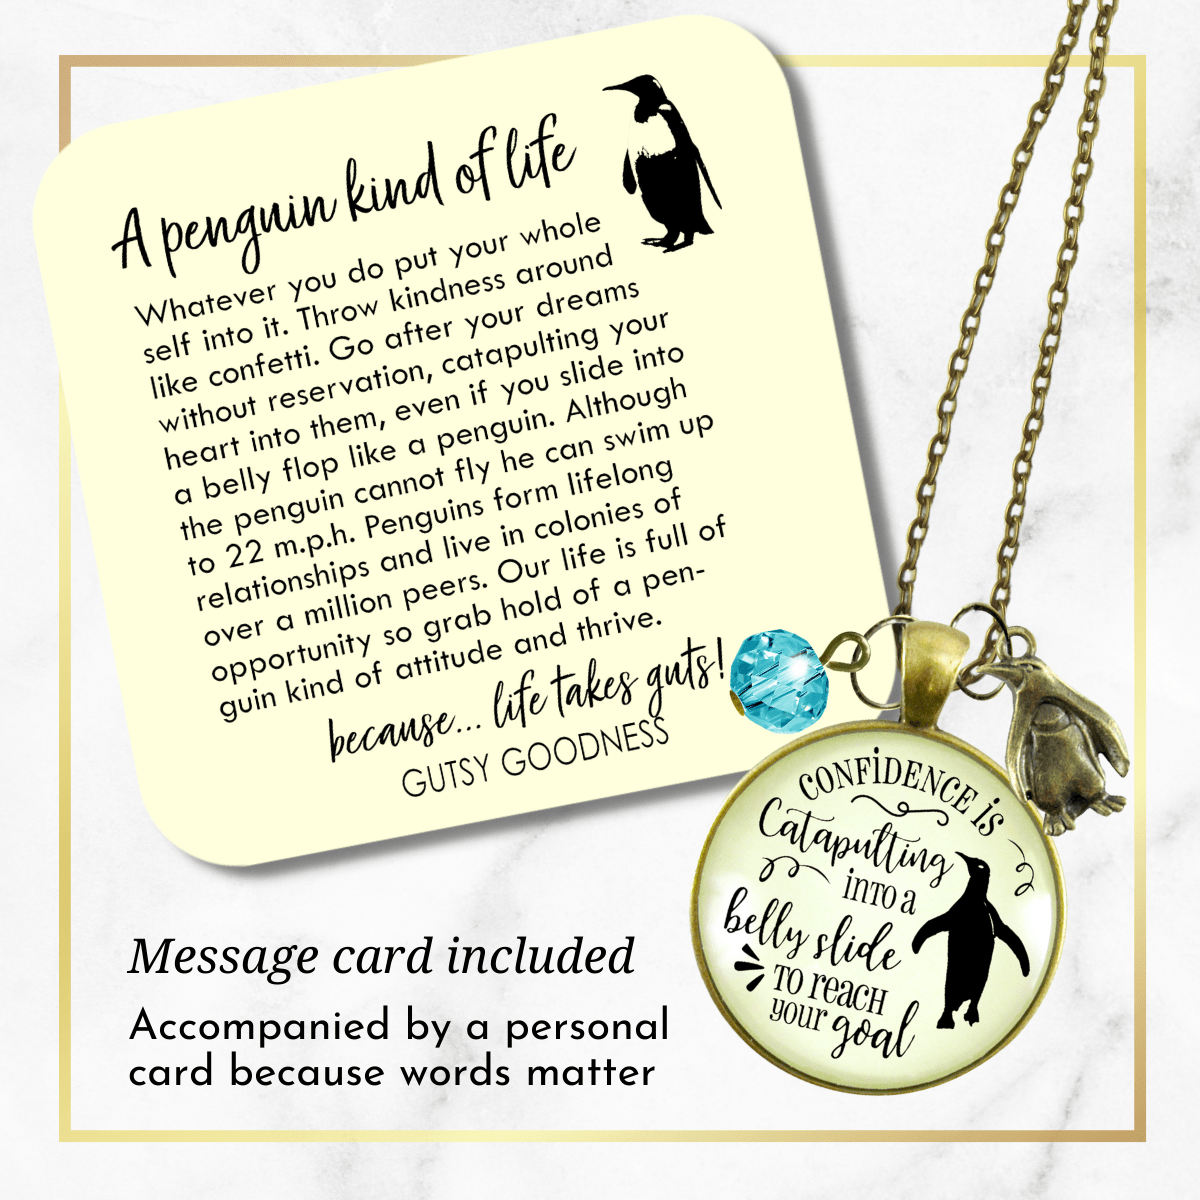 Gutsy Goodness Penguin Necklace Confidence is Catapulting Into A Belly Slide Jewelry Gift - Gutsy Goodness;Penguin Necklace Confidence Is Catapulting Into A Belly Slide Jewelry Gift - Gutsy Goodness Handmade Jewelry Gifts